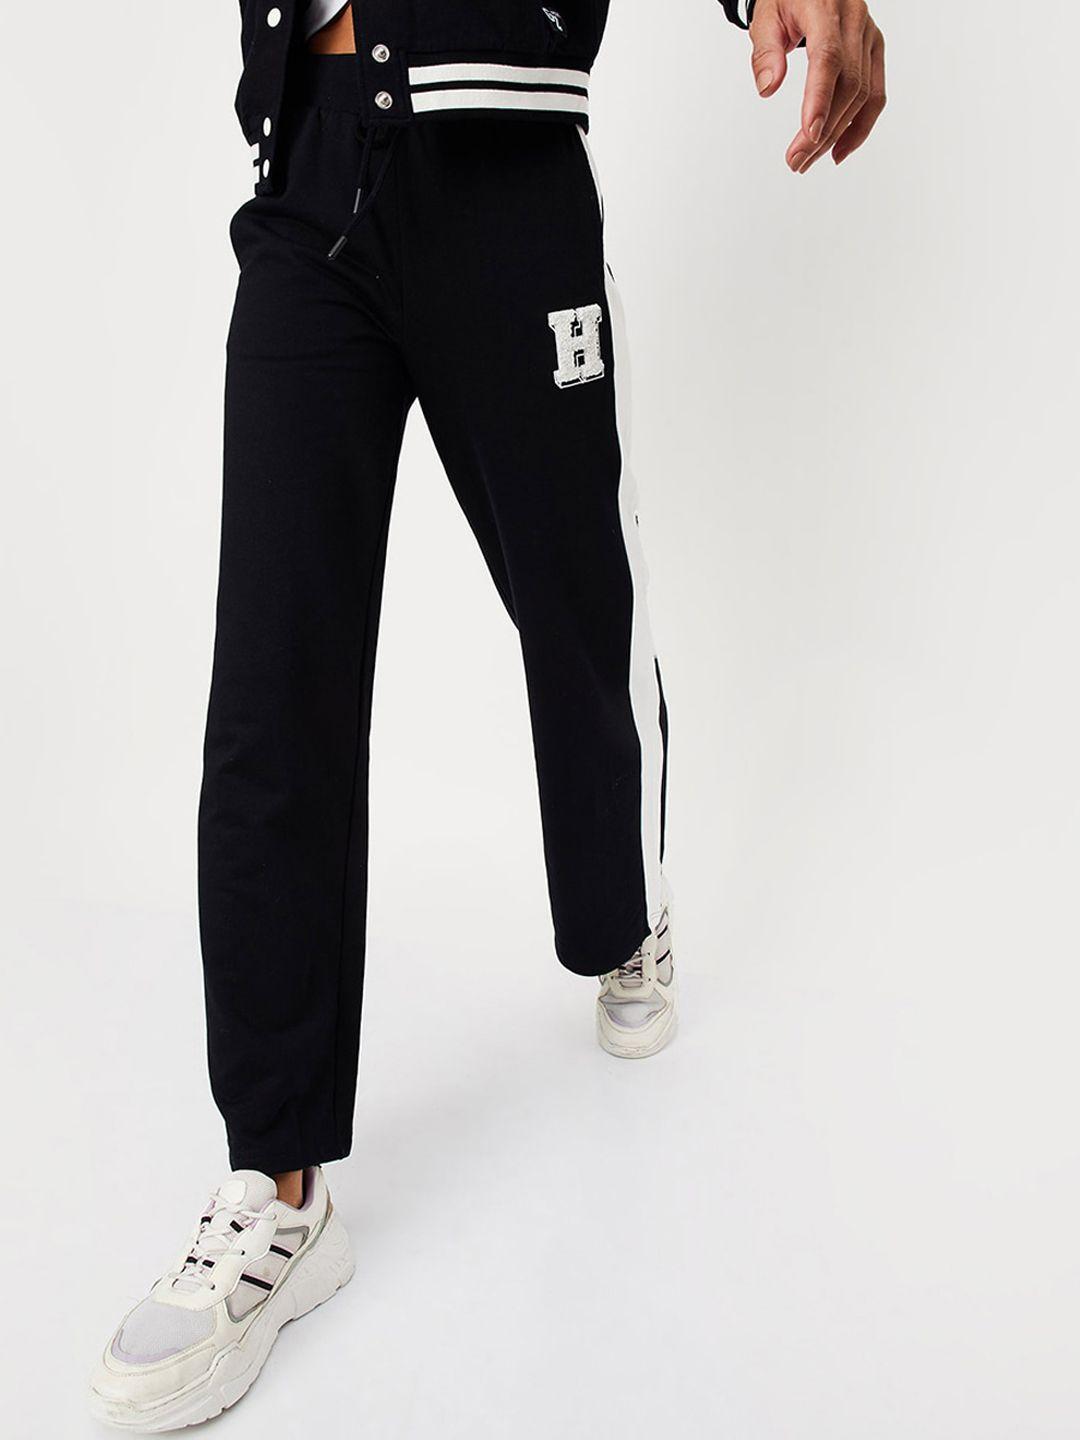 max-women-typography-printed-mid-rise-pure-cotton-track-pants